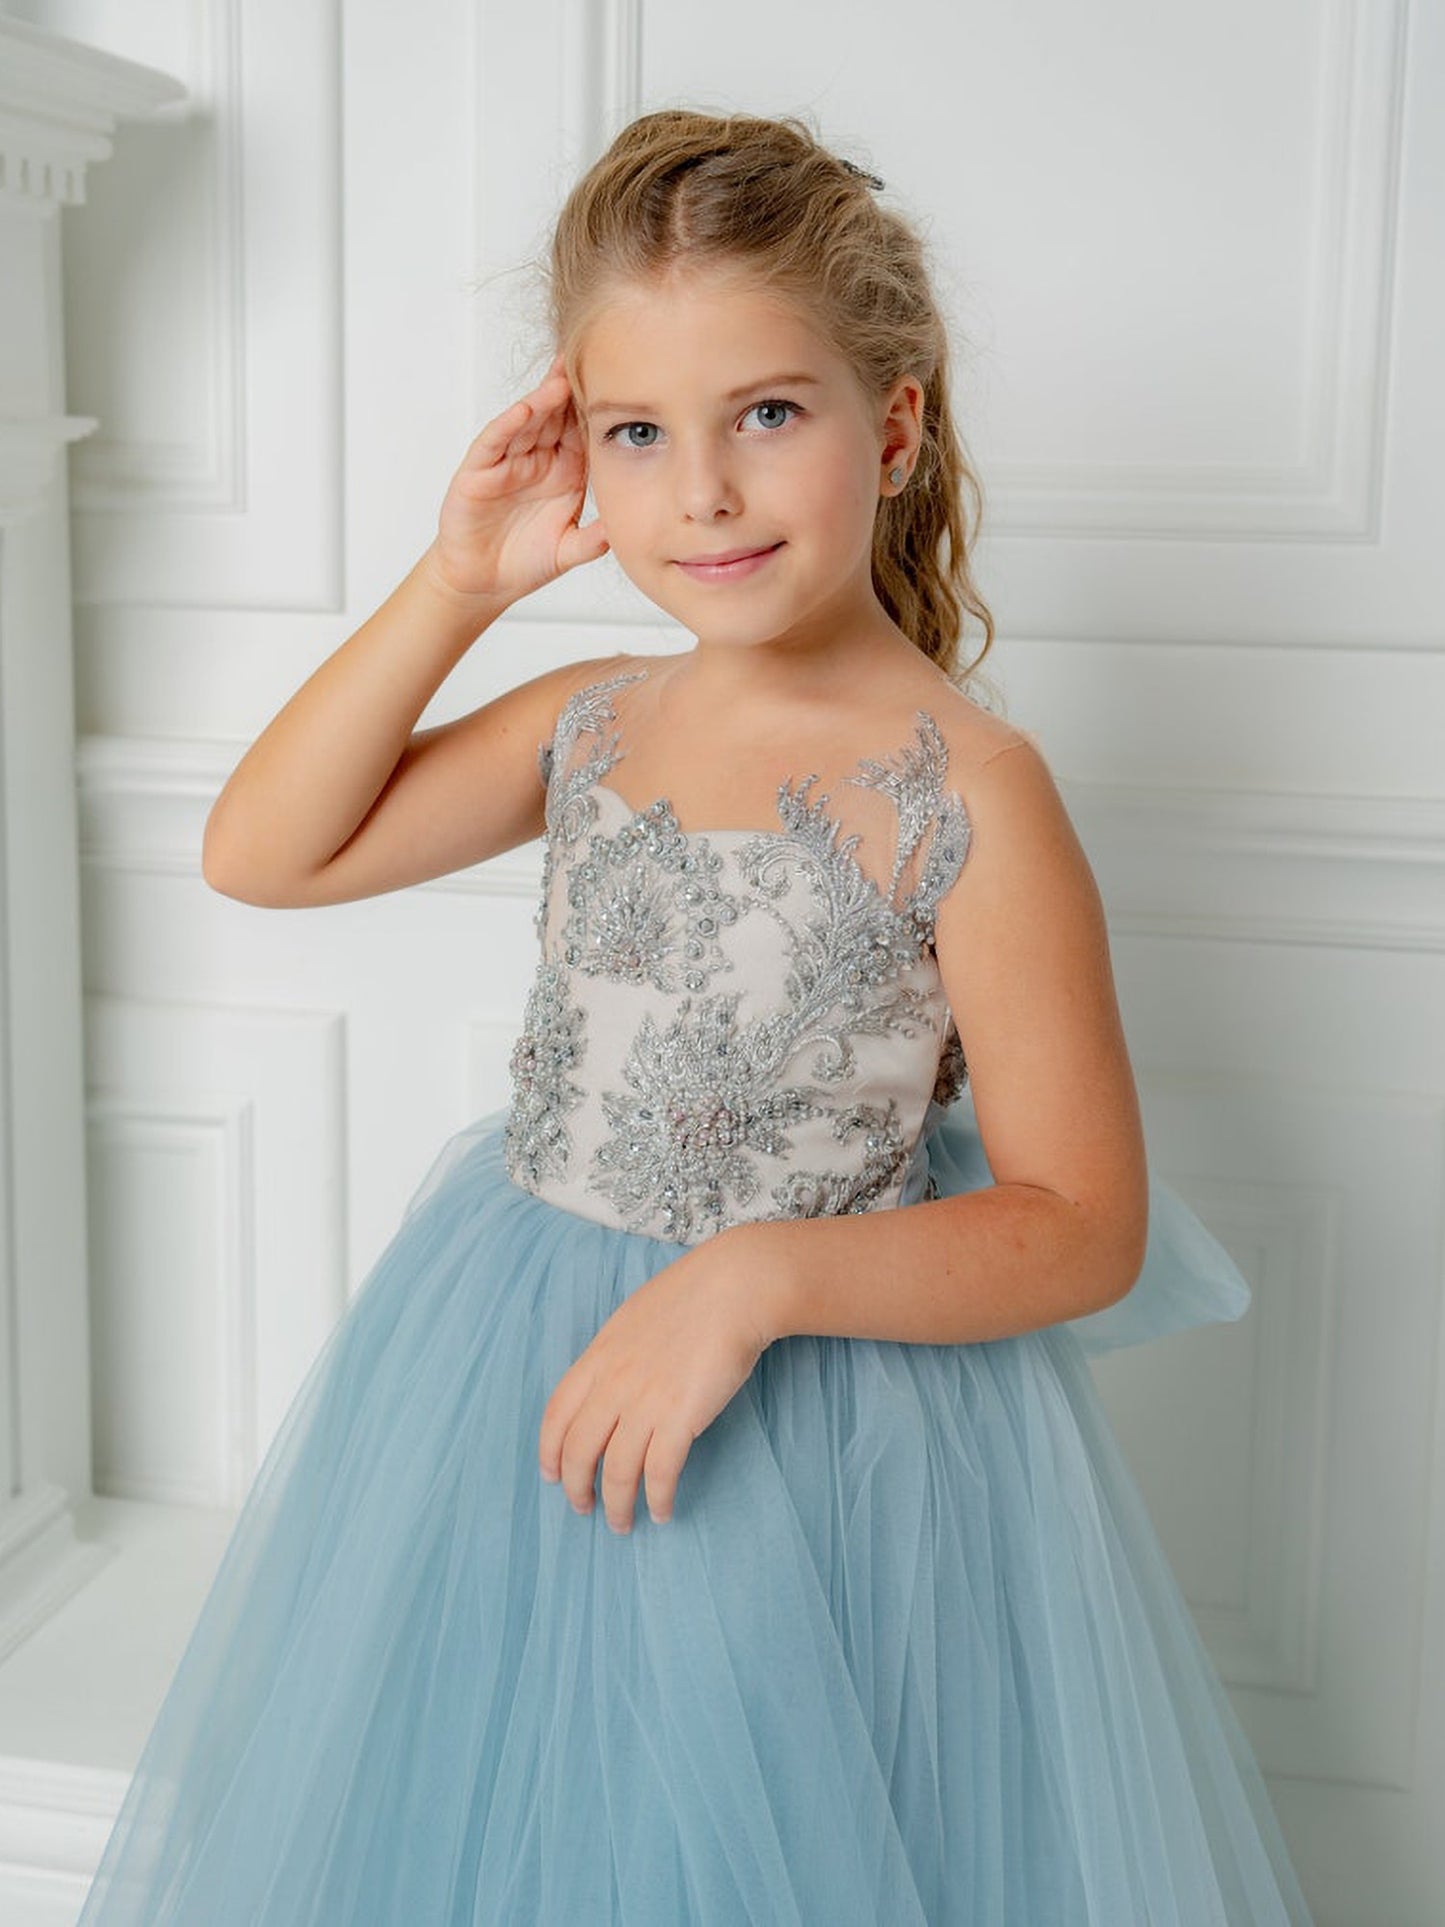 Load image into Gallery viewer, Lovely Blue Flower Girl Dress for Wedding Little Girls Pageant Gown Birthday Party Dress
